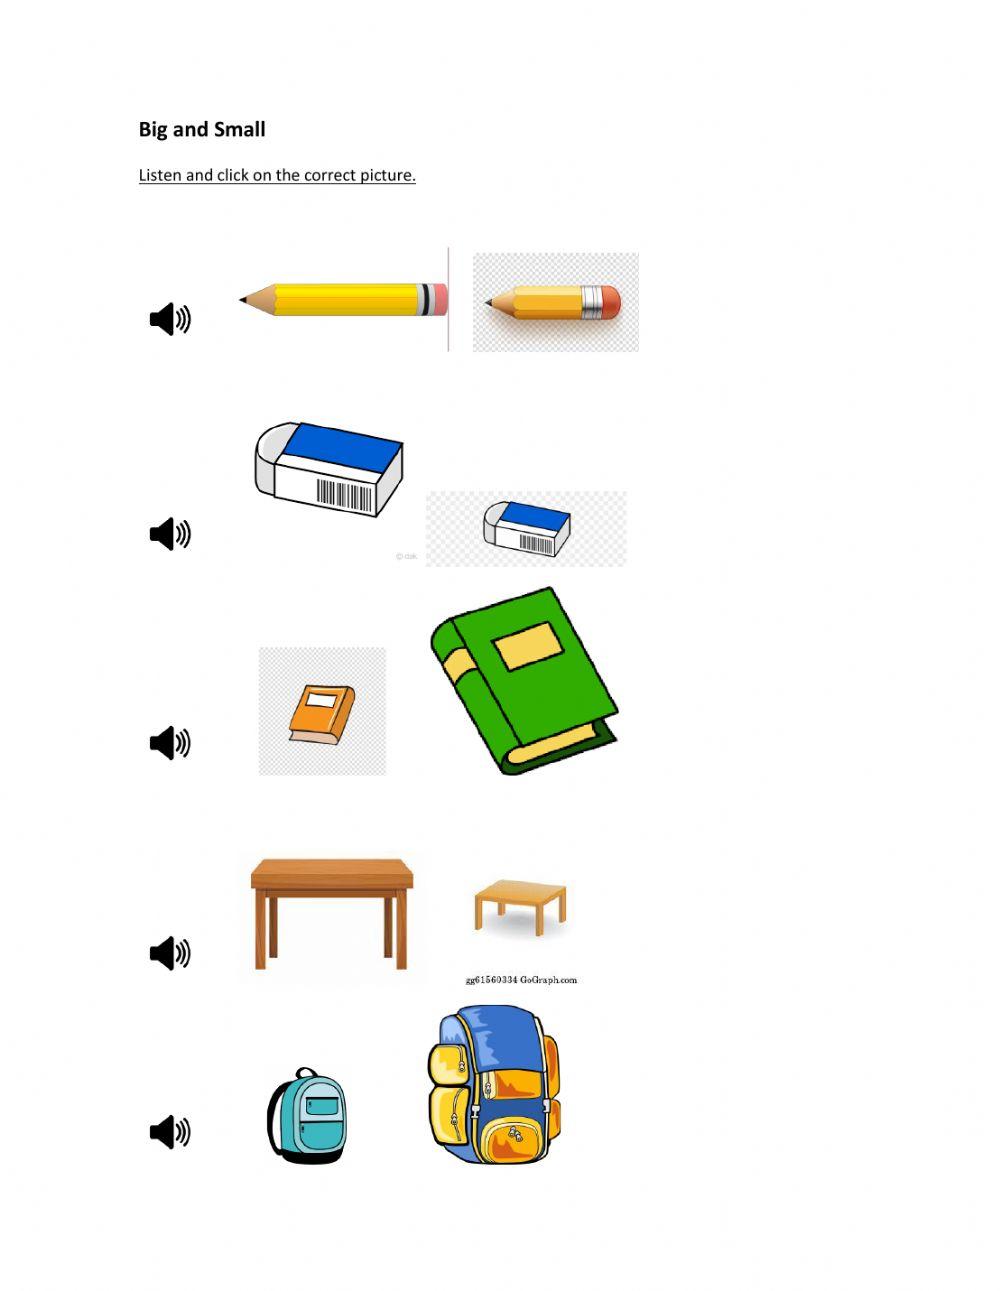 Big and Small classroom objects